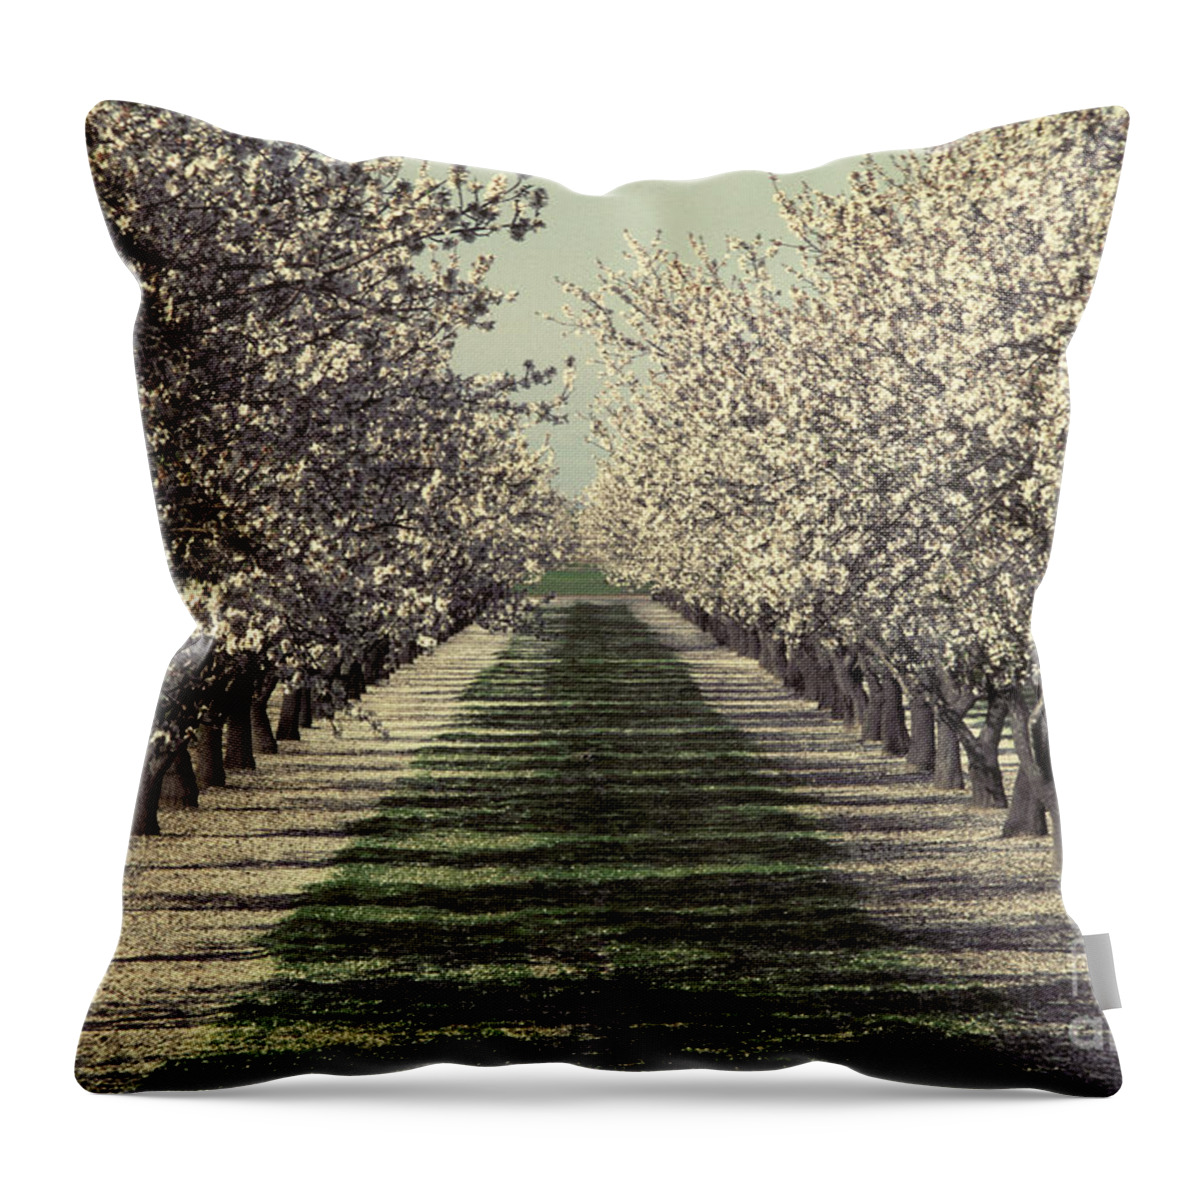 Plant Throw Pillow featuring the photograph Almond Orchard In Bloom #1 by Ron Sanford